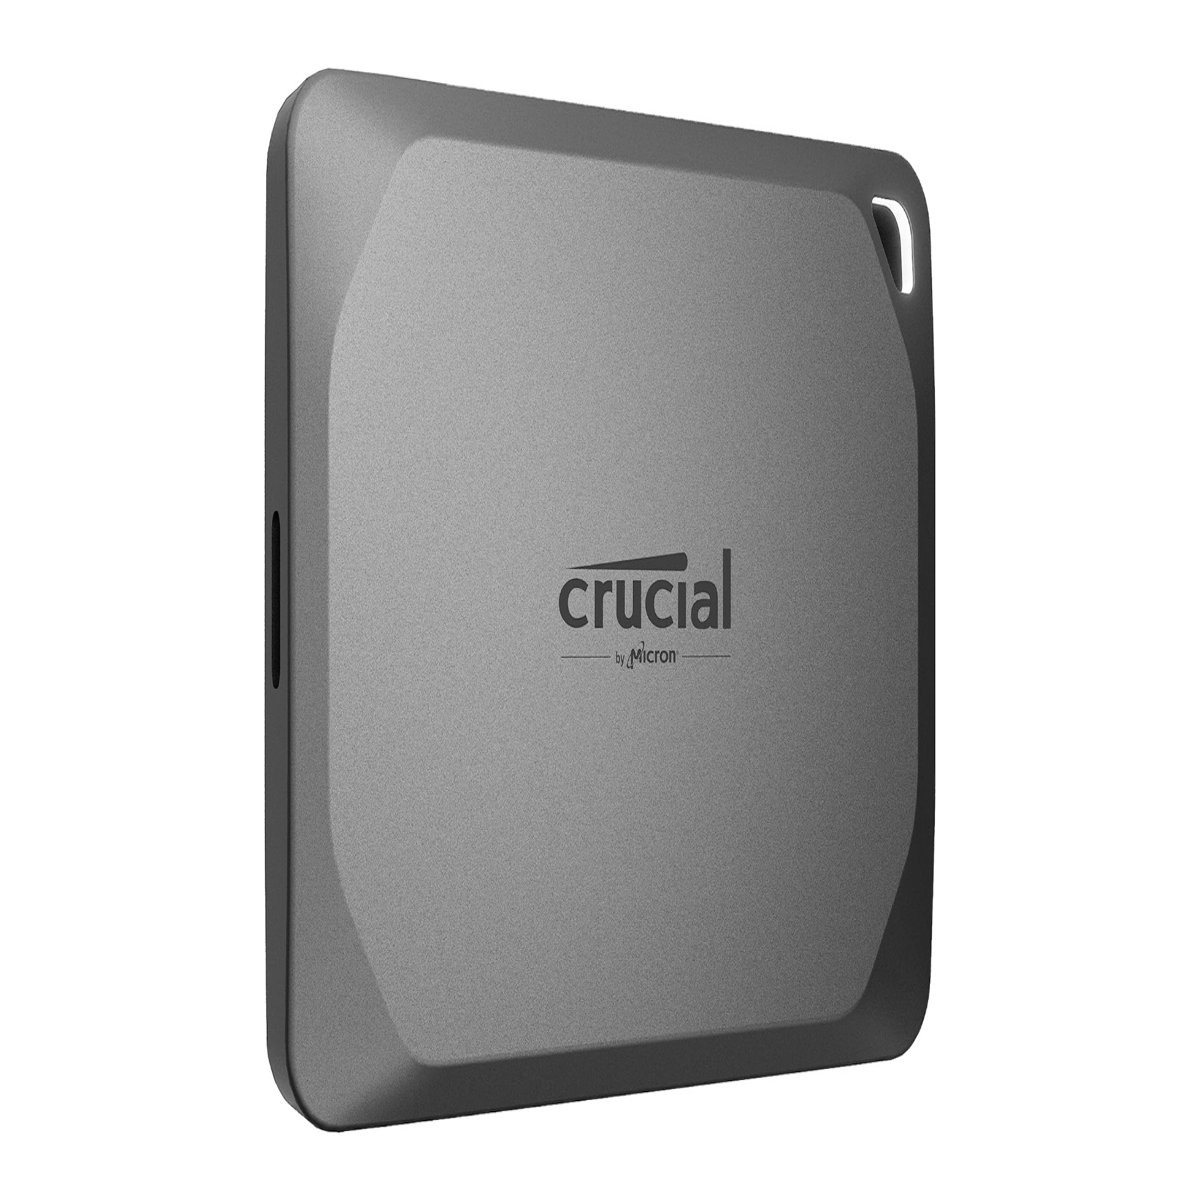 Cyber Monday : le SSD Crucial MX500 de 4 To tombe à 174€